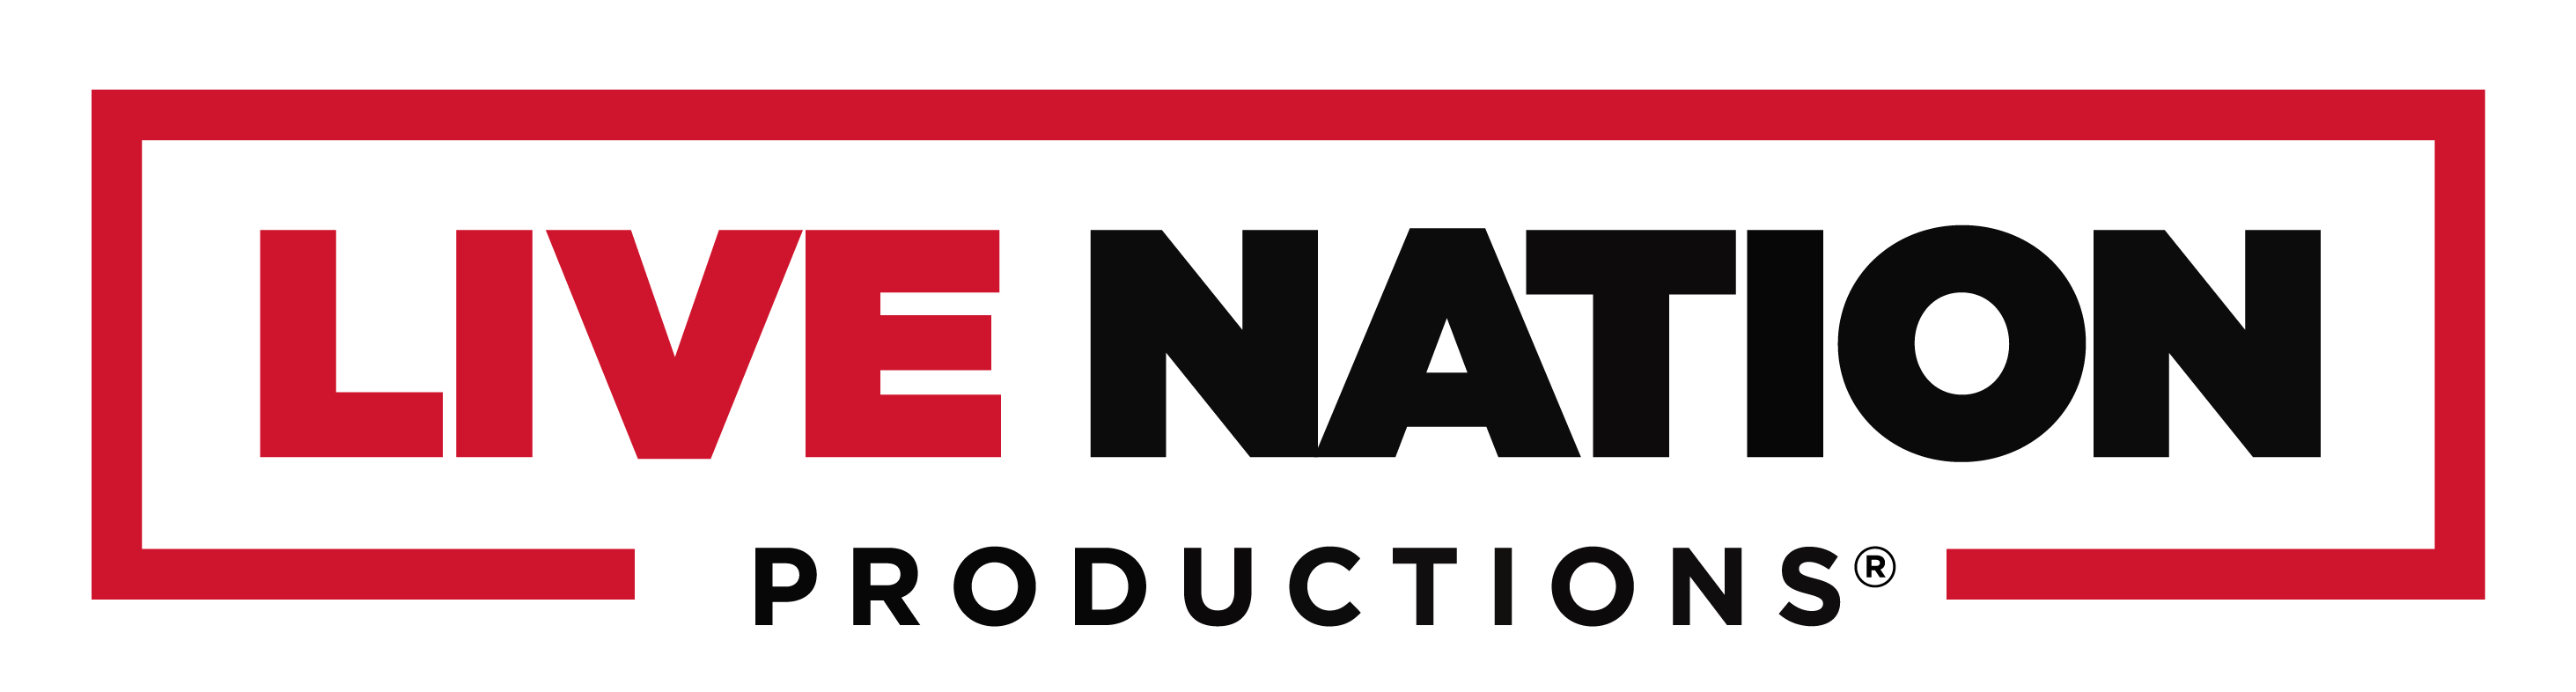 Live Nation Productions